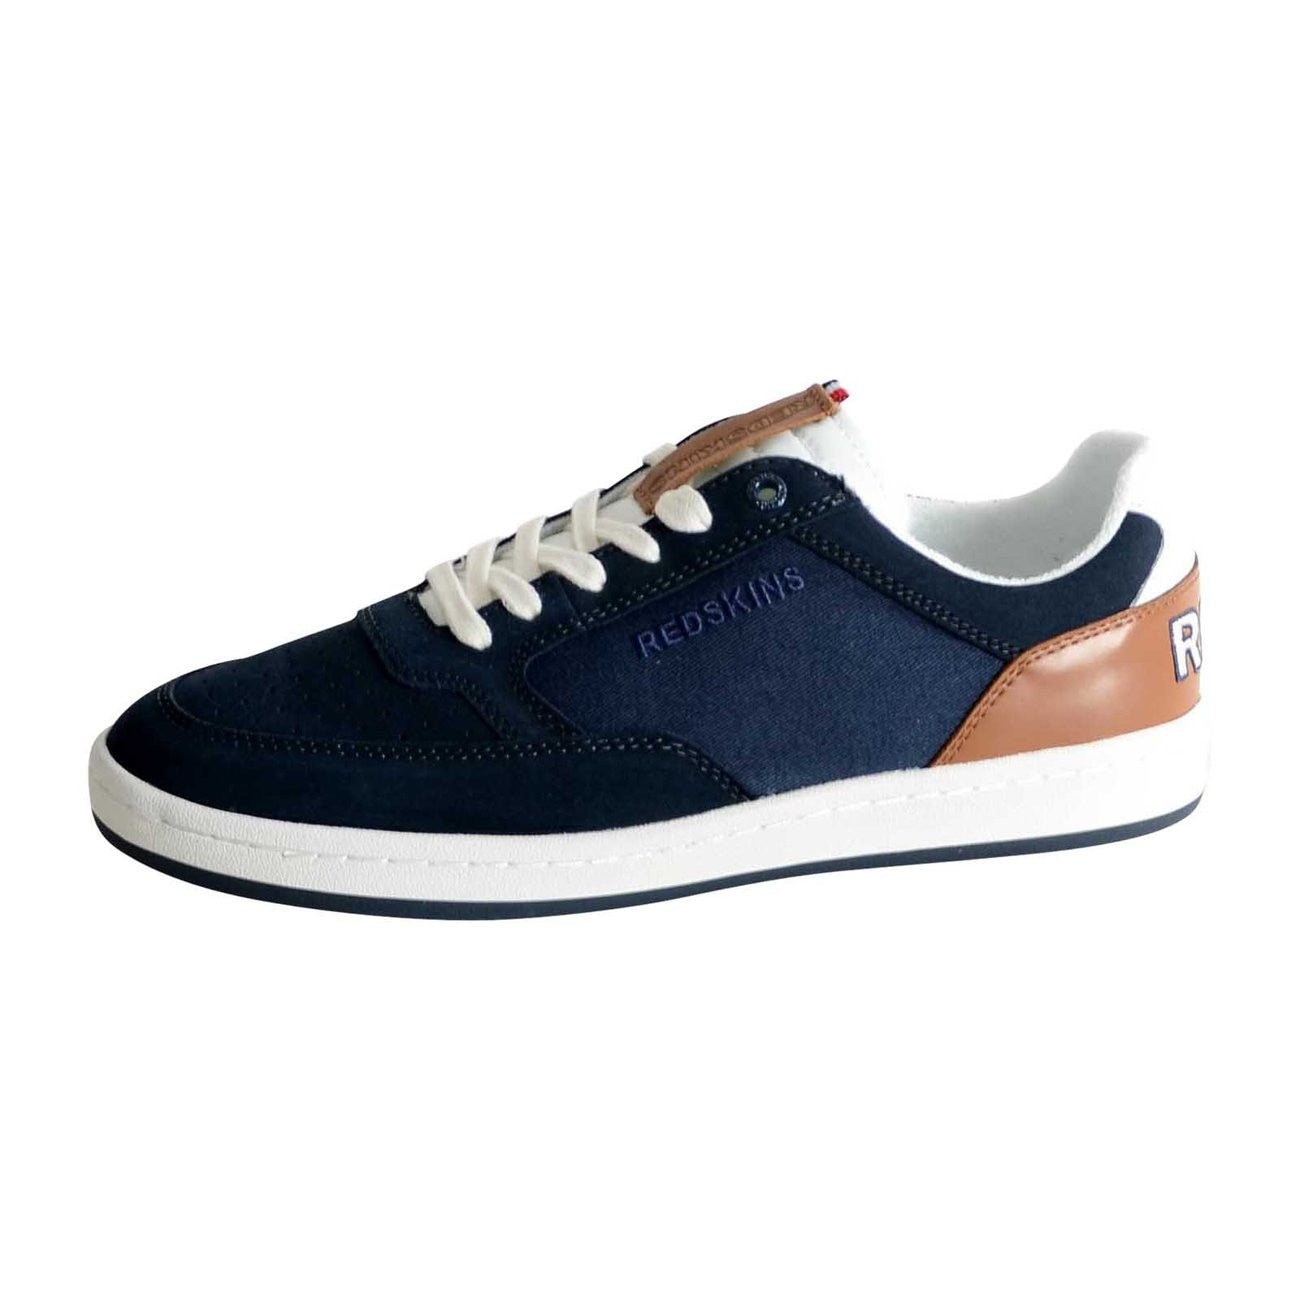 Shoes Men Casual  | Navy